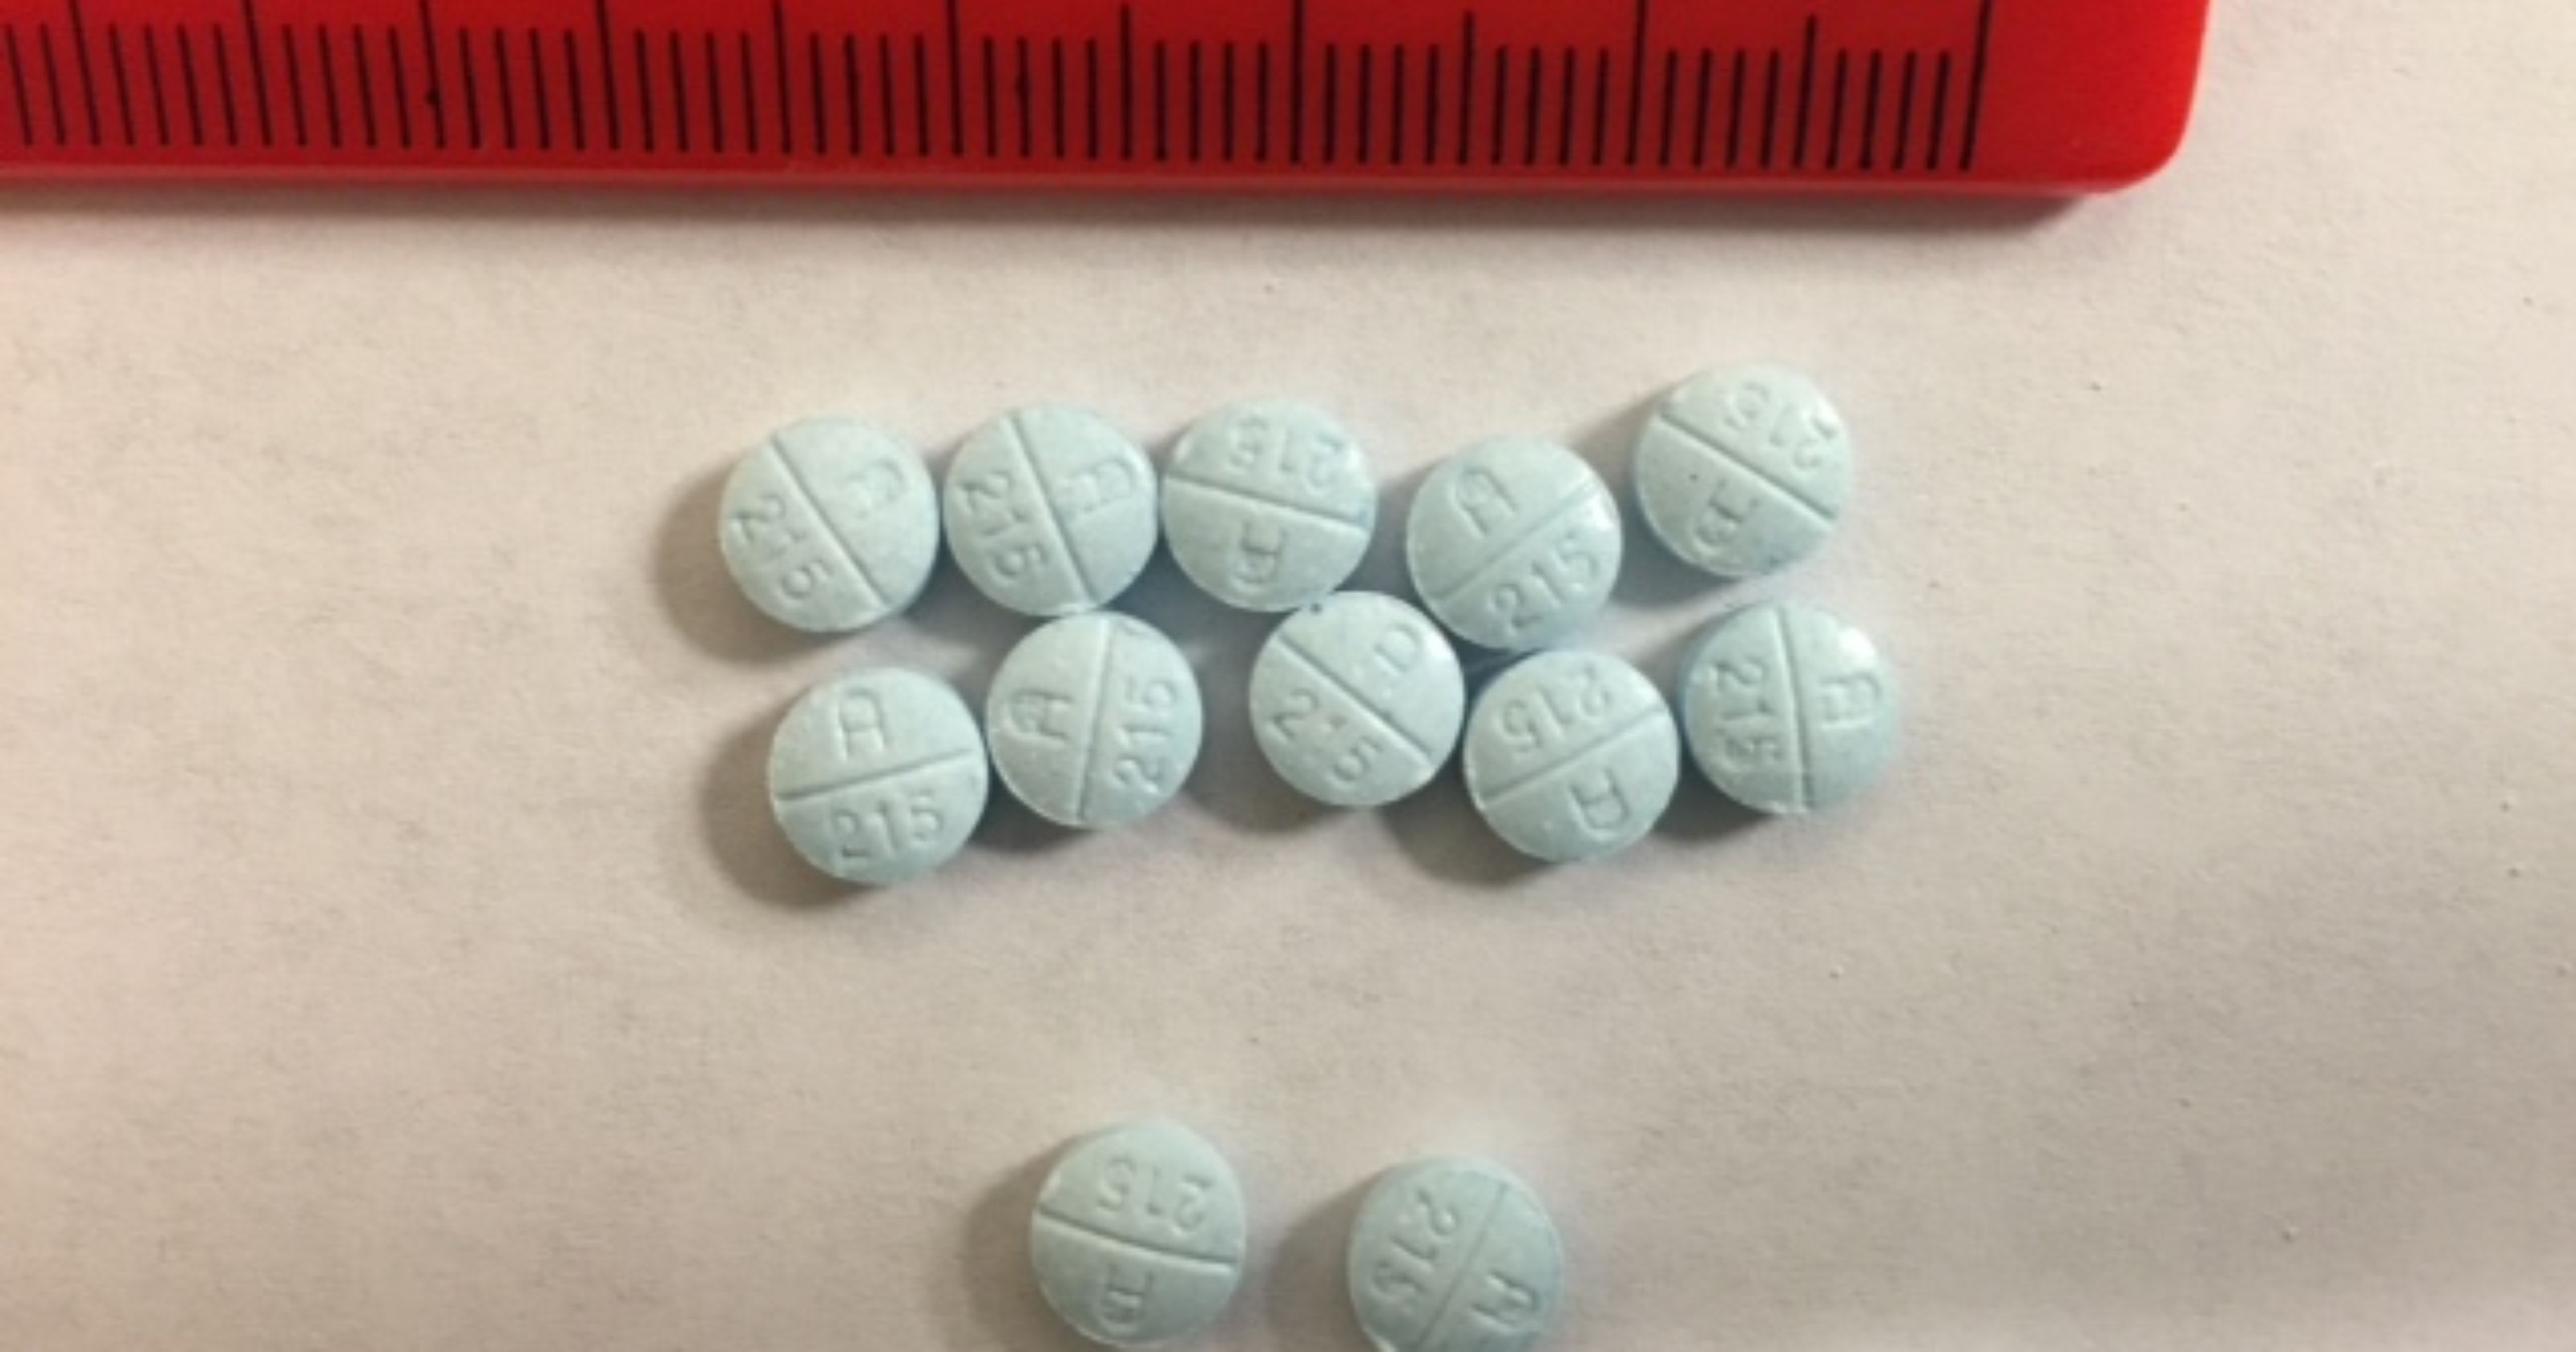 TBI: Fake oxycodone pills contain potentially deadly drug